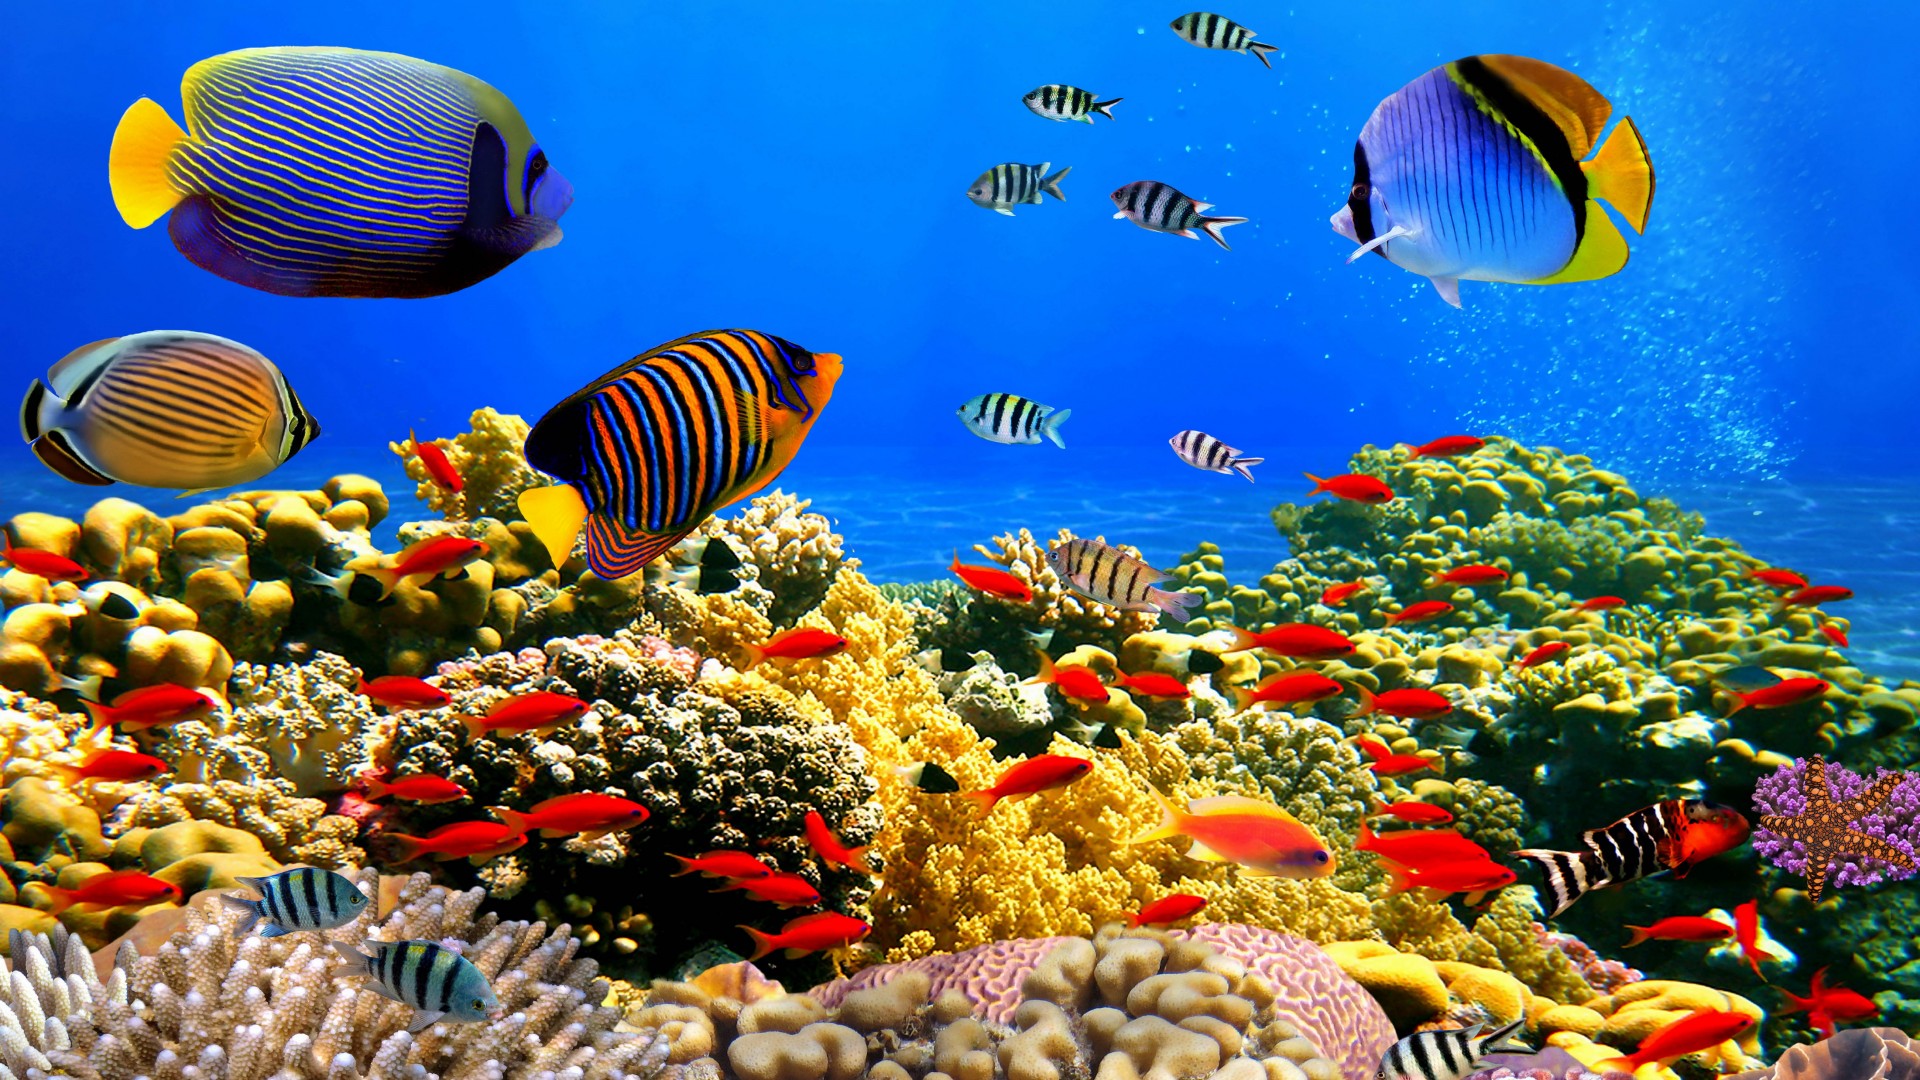 Colorful Underwater Fish Background - 1920x1080 Wallpaper 